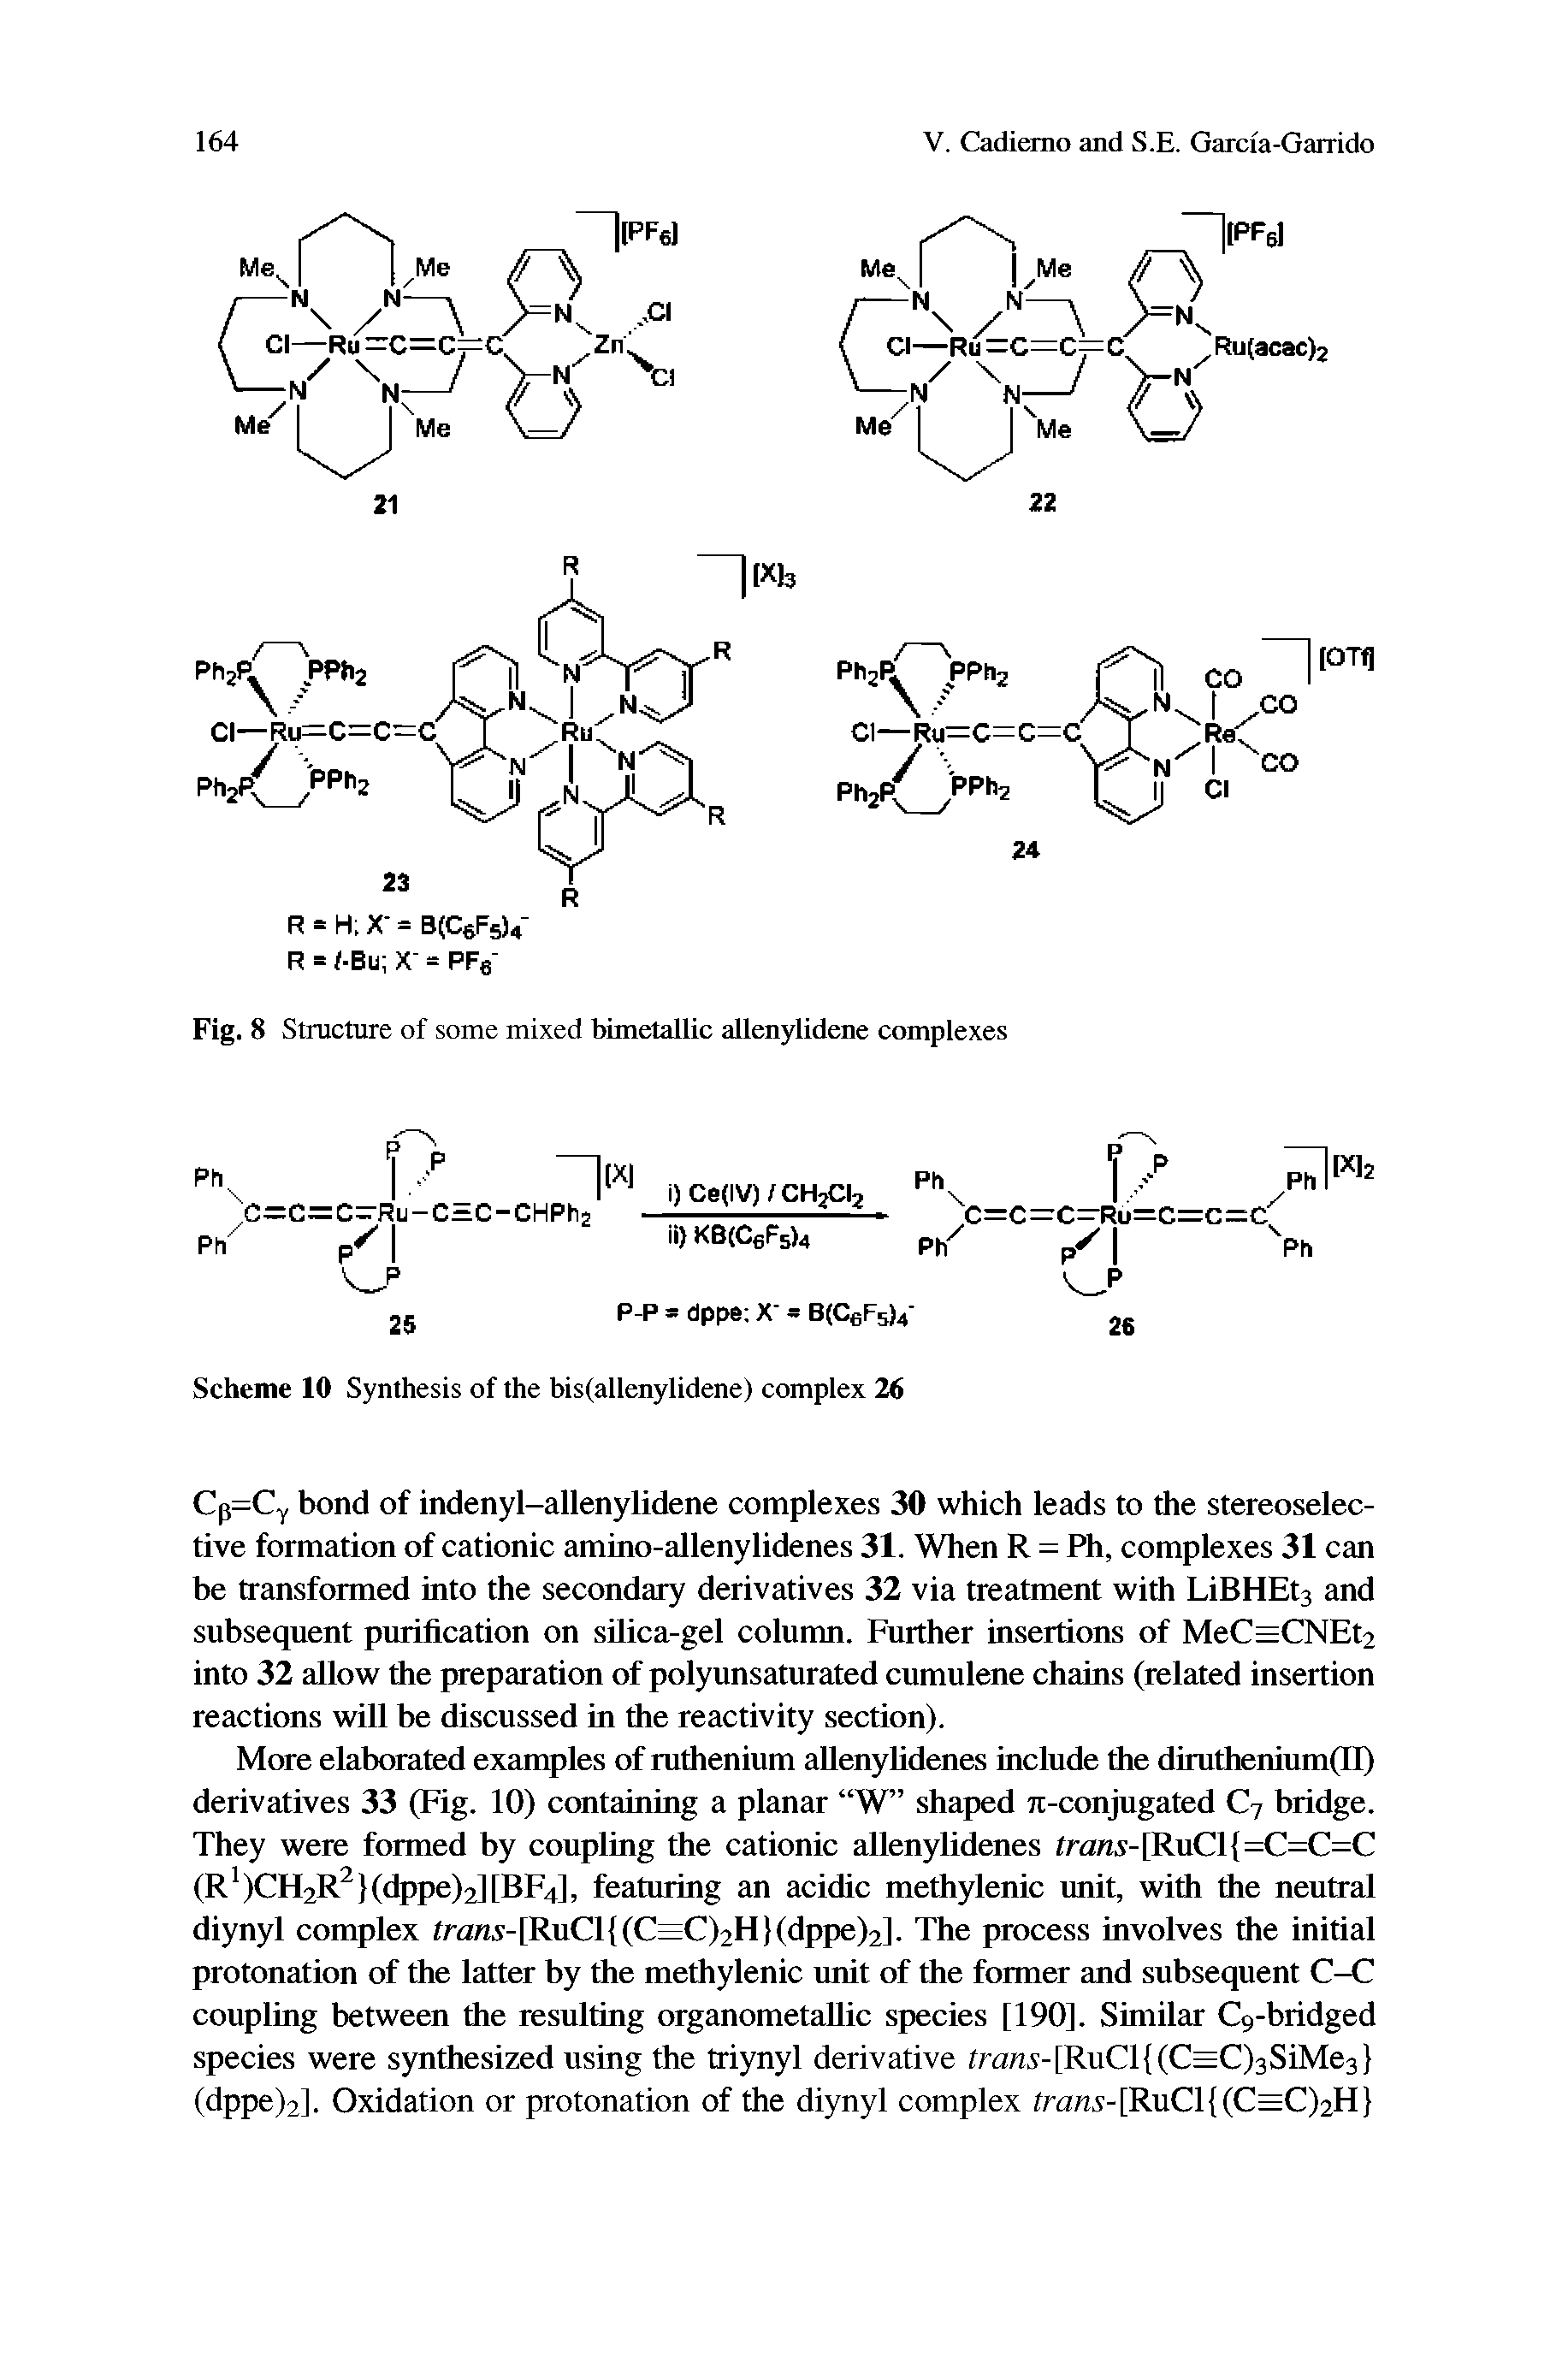 Fig. 8 Structure of some mixed bimetallic allenylidene complexes...